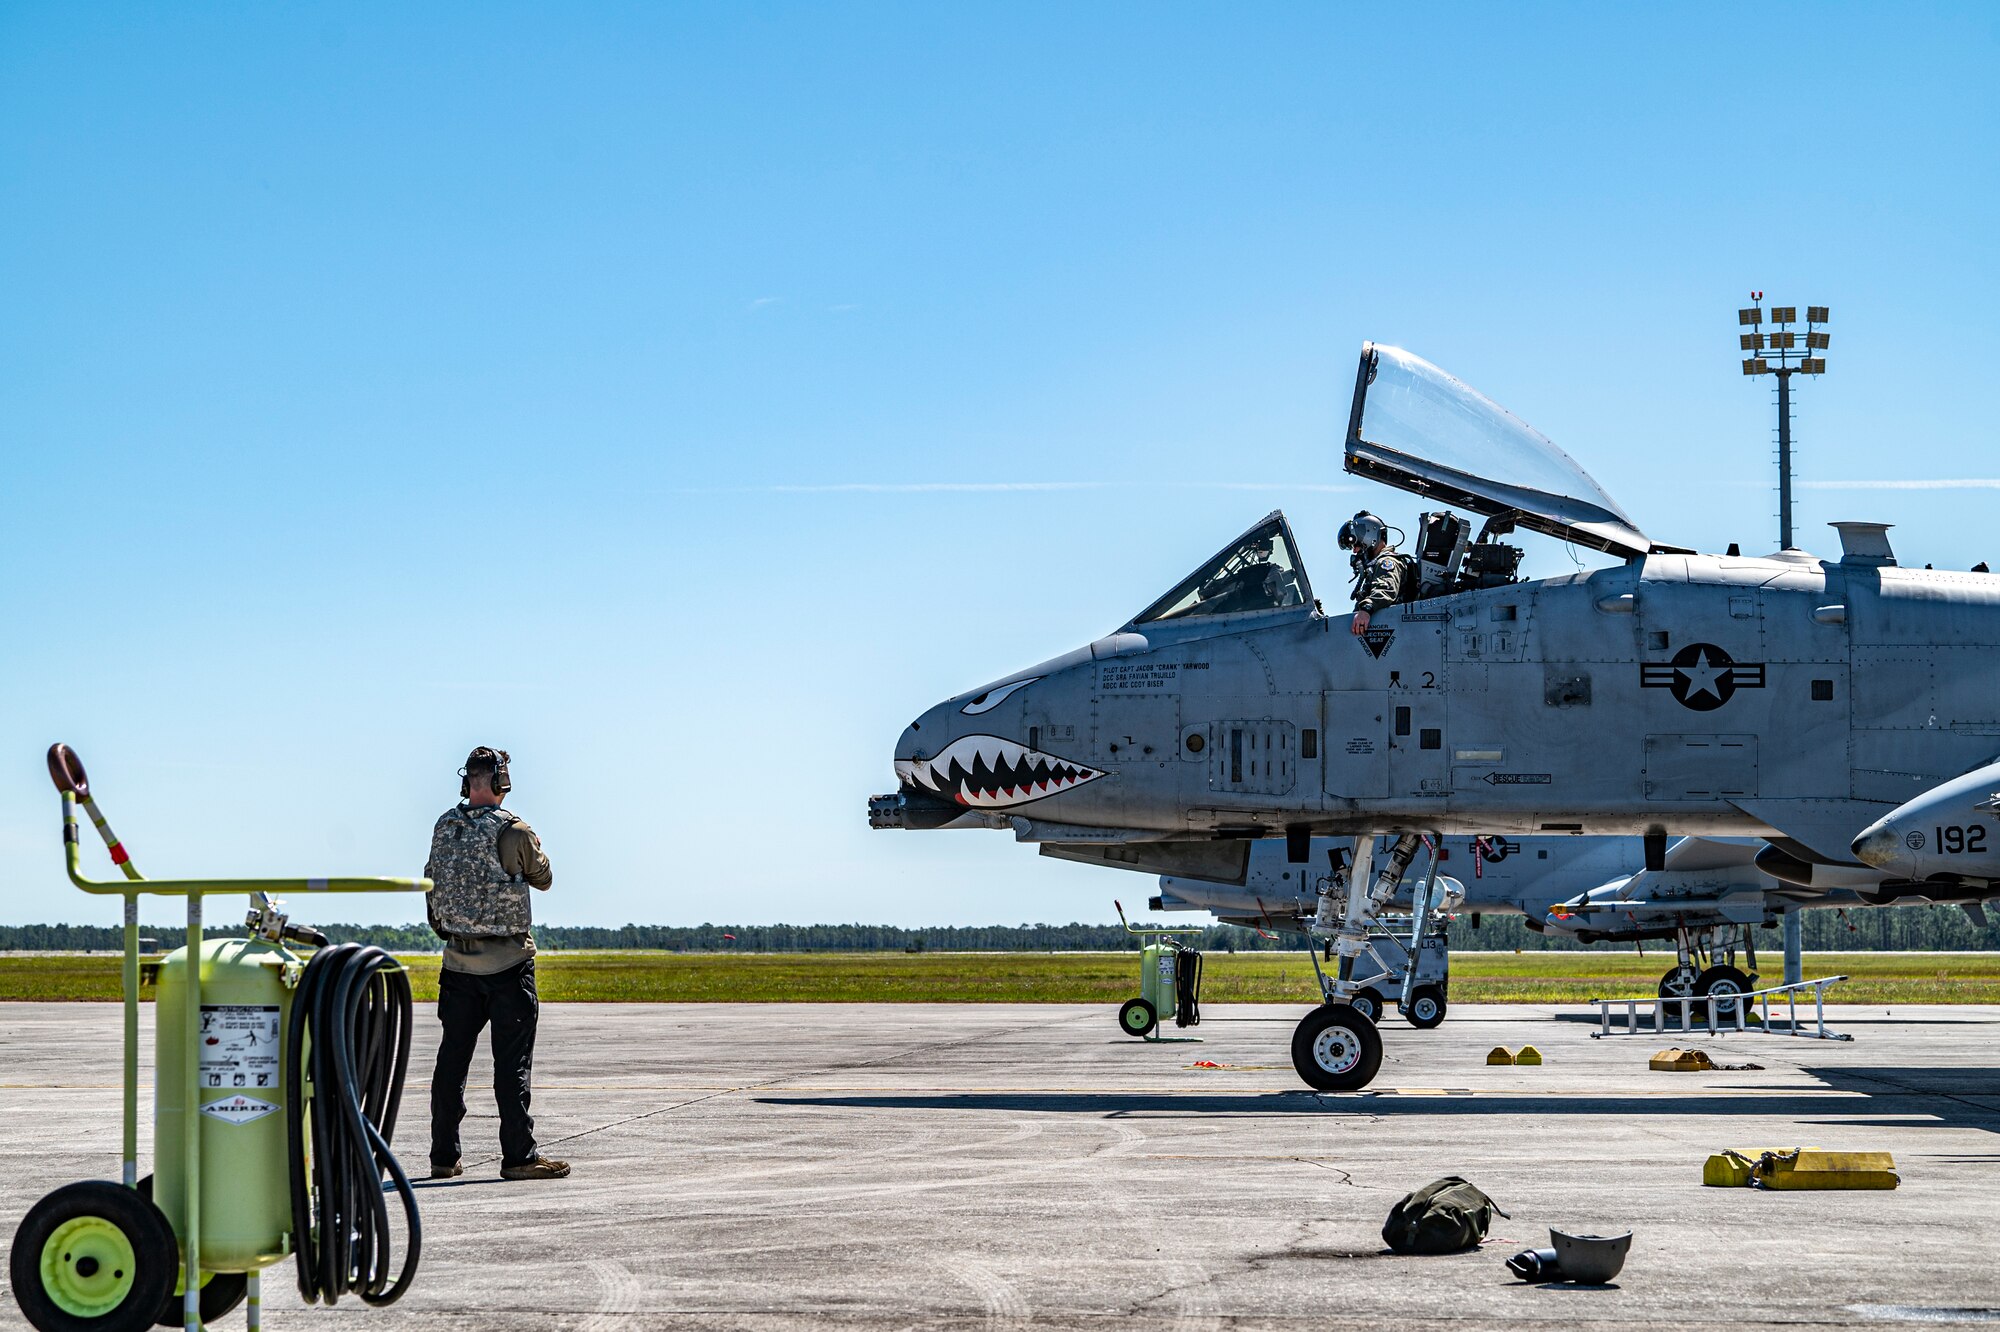 U.S. Air Force Airman 1st Class Conner Holman, 74th Fighter Generation Squadron crew chief, prepares to launch an A-10C Thunderbolt II for Exercise Ready Tiger 24-1 at Avon Park Air Force Range, Florida, April 12, 2024. Maintenance Airmen and pilots worked in tandem to generate sorties at a contingency location with limited equipment and personnel. Ready Tiger 24-1 is a readiness exercise demonstrating the 23rd Wing’s ability to plan, prepare and execute operations and maintenance to project air power in contested and dispersed locations, defending the United States’ interests and allies. (U.S. Air Force photo by Airman 1st Class Leonid Soubbotine)